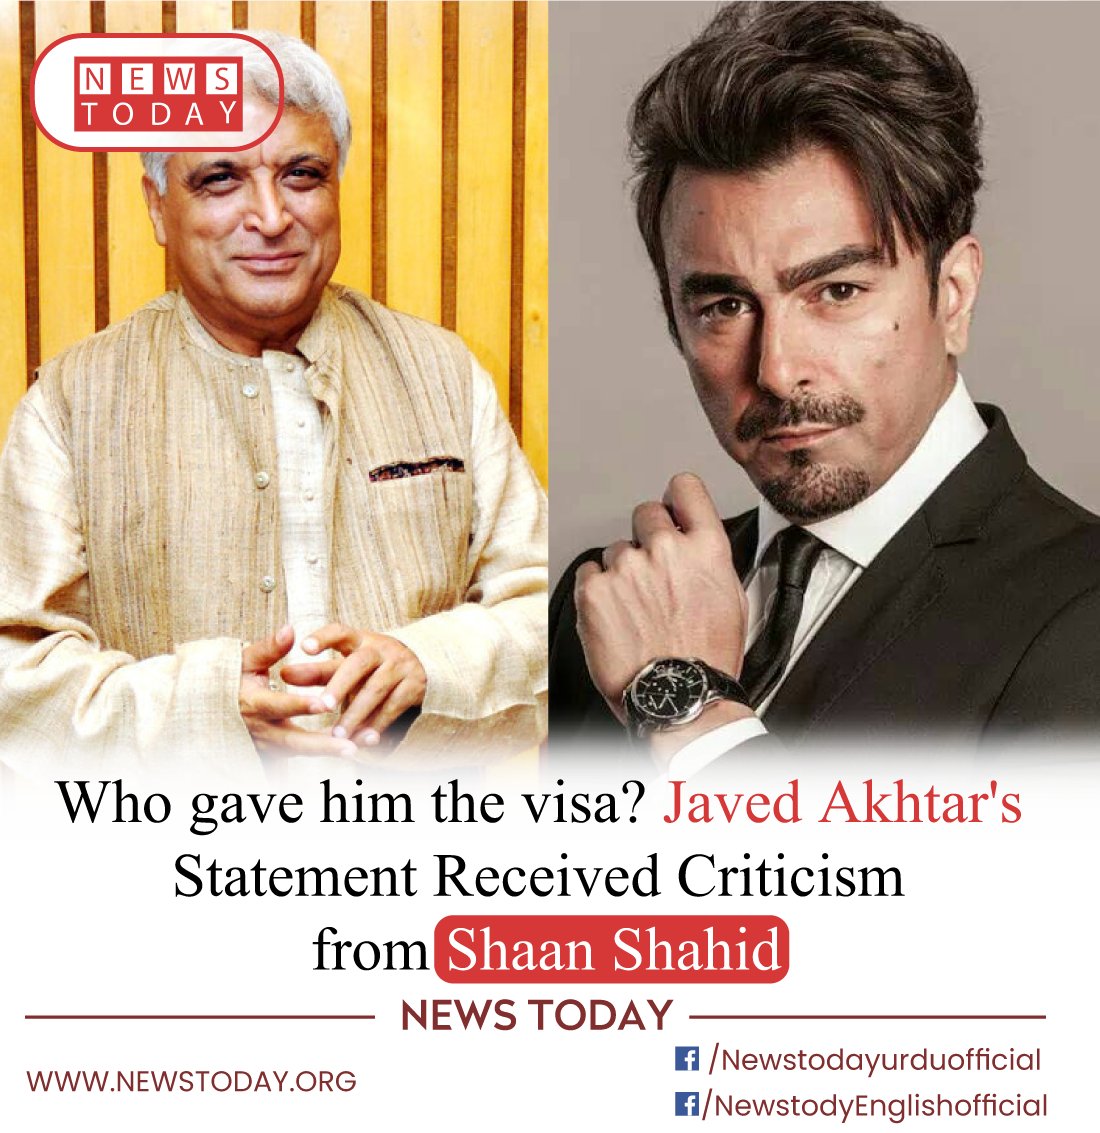 Javed Akhtar's speech at the Faiz Festival in Lahore was criticised by Faisal Qureshi, Shaan Shahid, and other Pakistani actors and social media users.

Visit Now

newstoday.org/who-gave-him-t…

#newstoday #Breakingnews #javedakhtar #ShaanShahid #Shaan #socialmedia #pakistaniactors